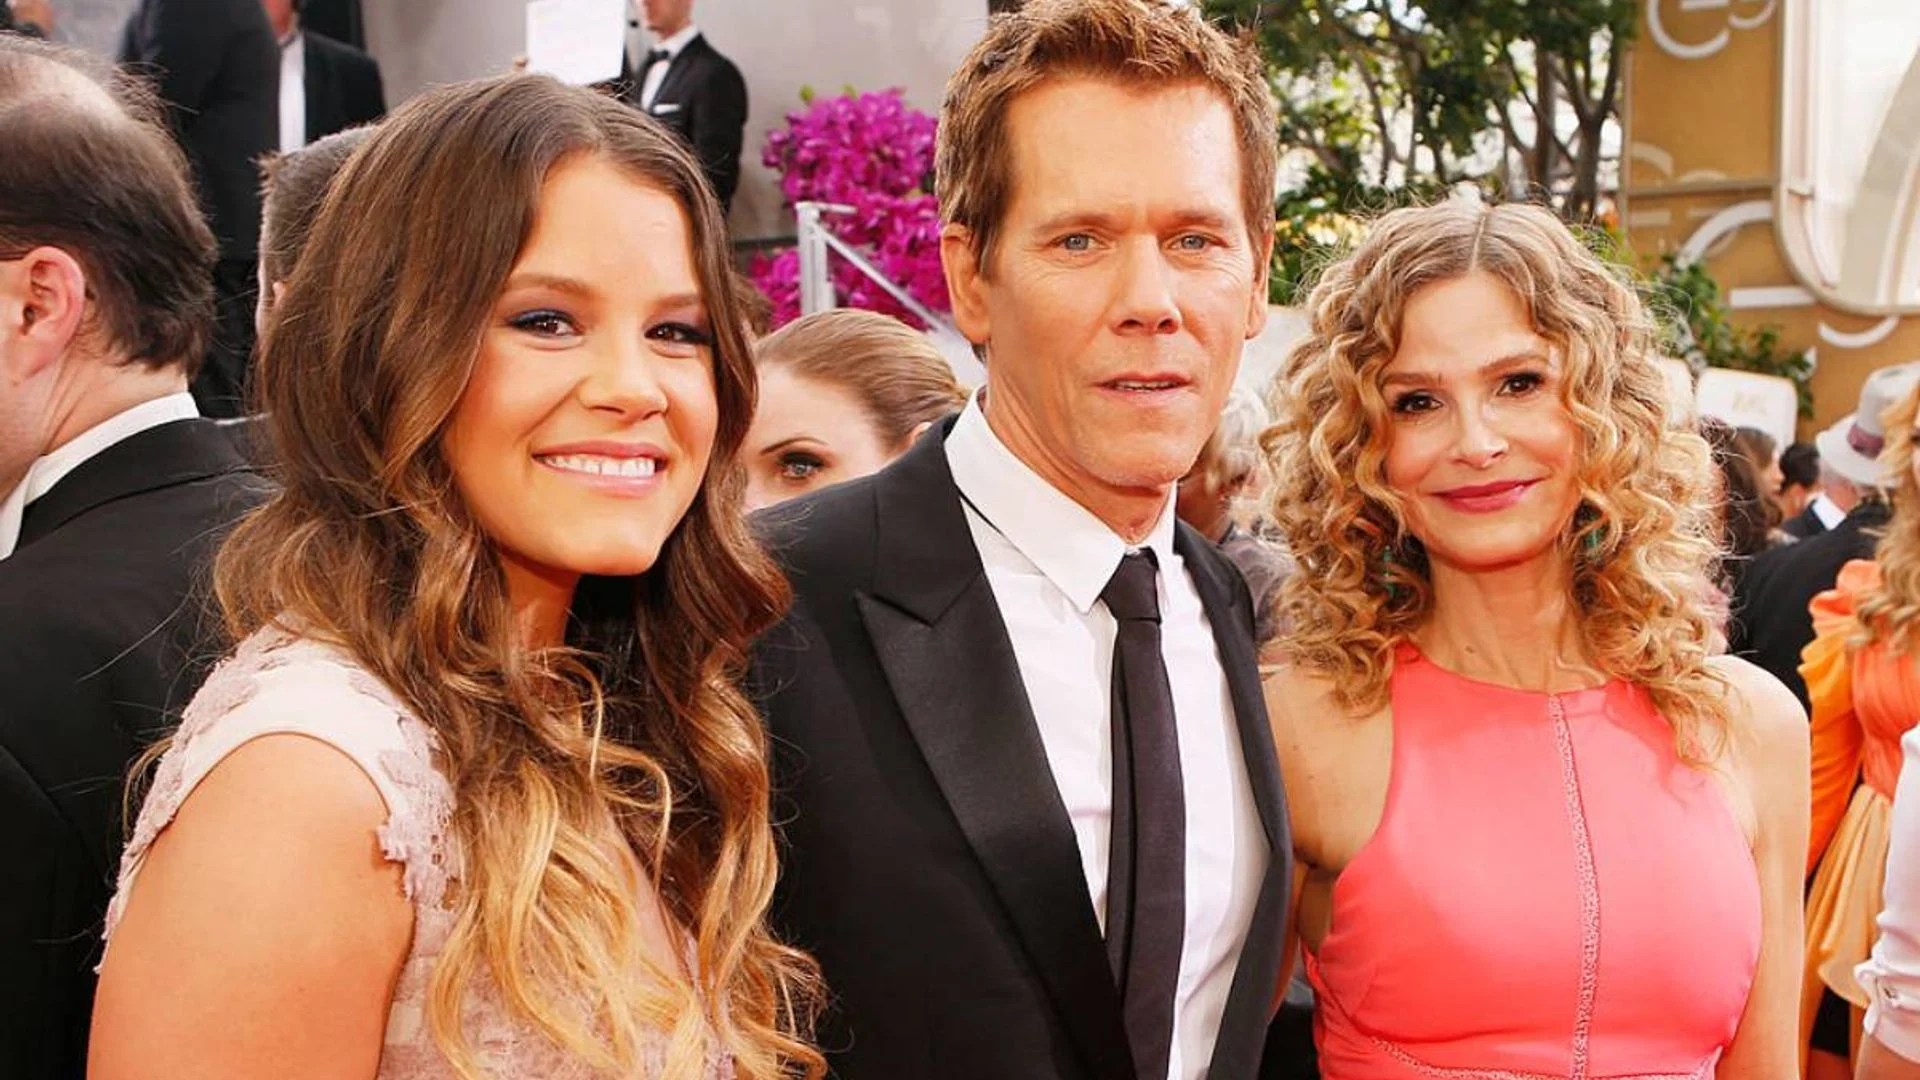 Kevin Bacon's daughter Sosie shares emotional 'engagement' photo